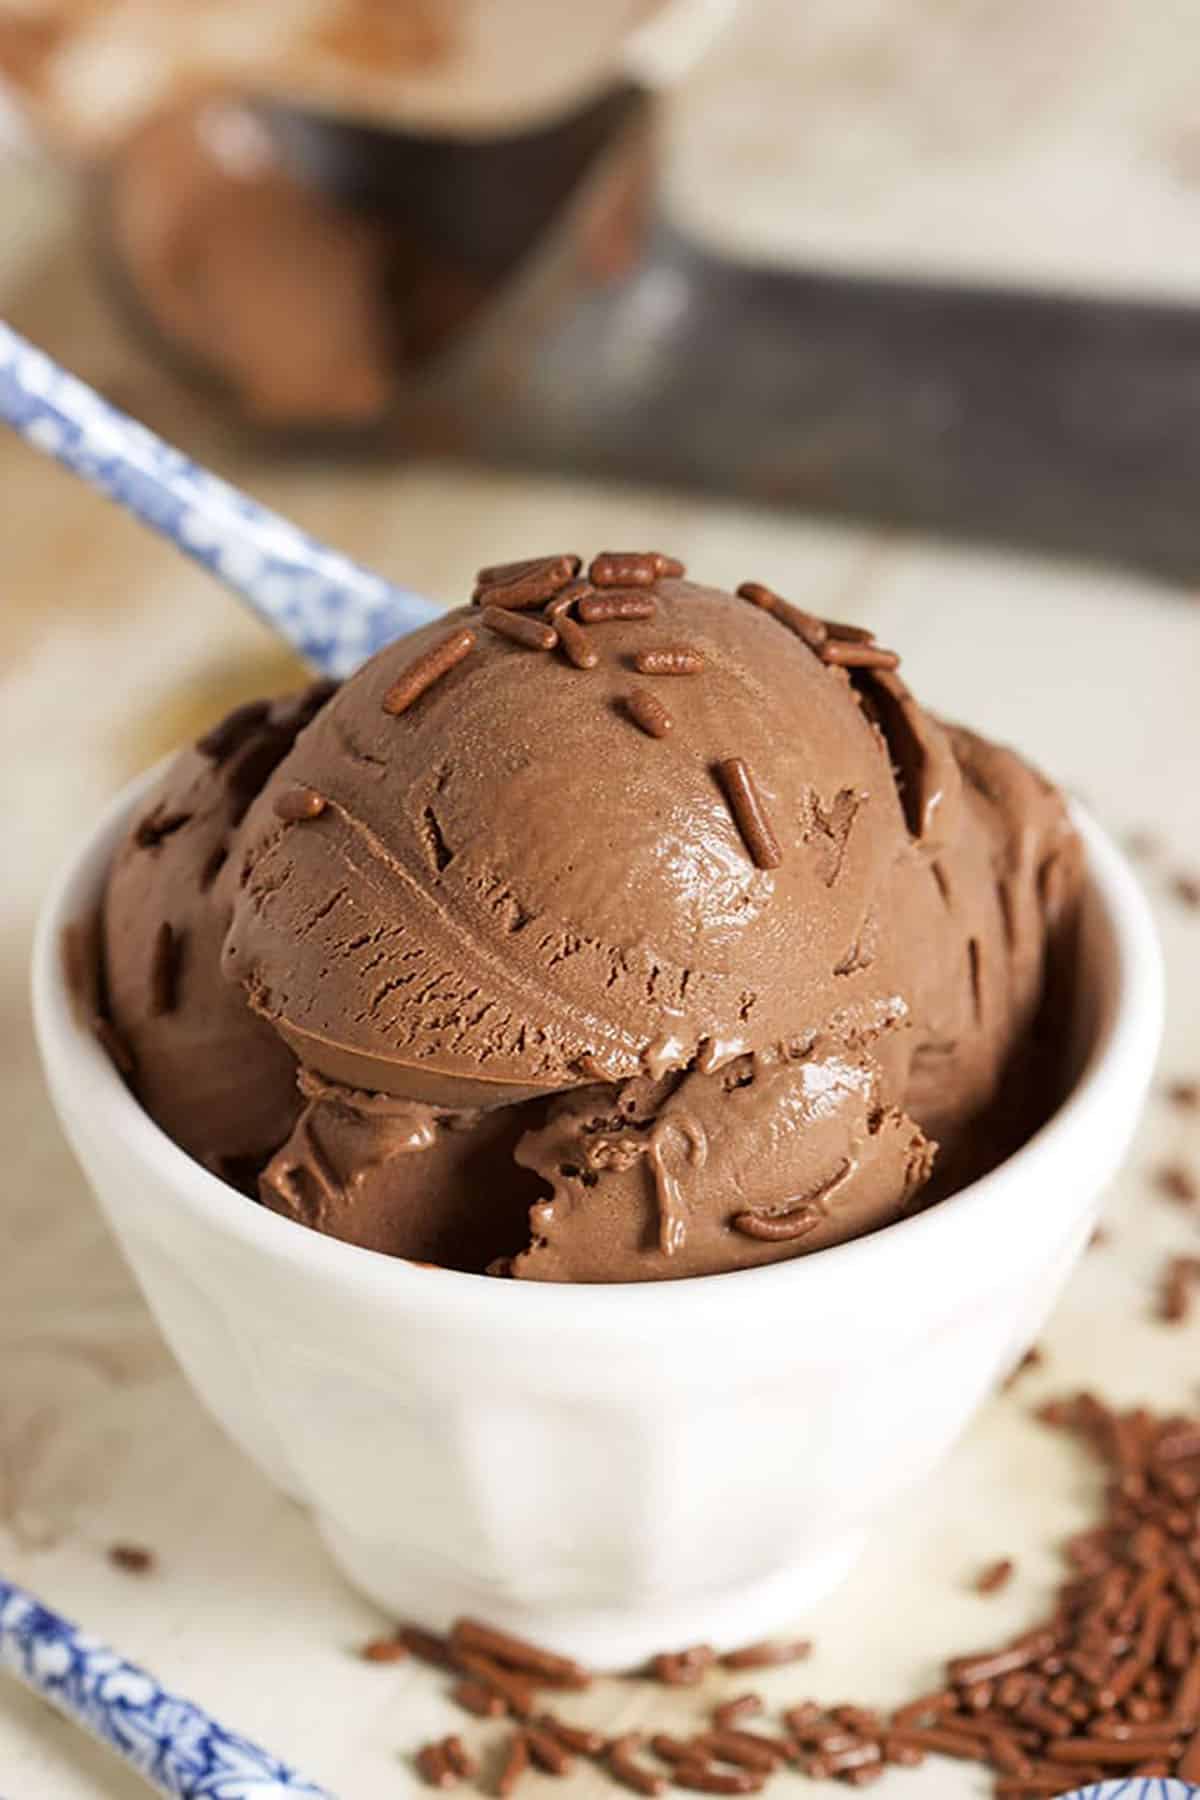 Chocolate Ice Cream in a white bowl with chocolate sprinkles and a blue and white spoon.